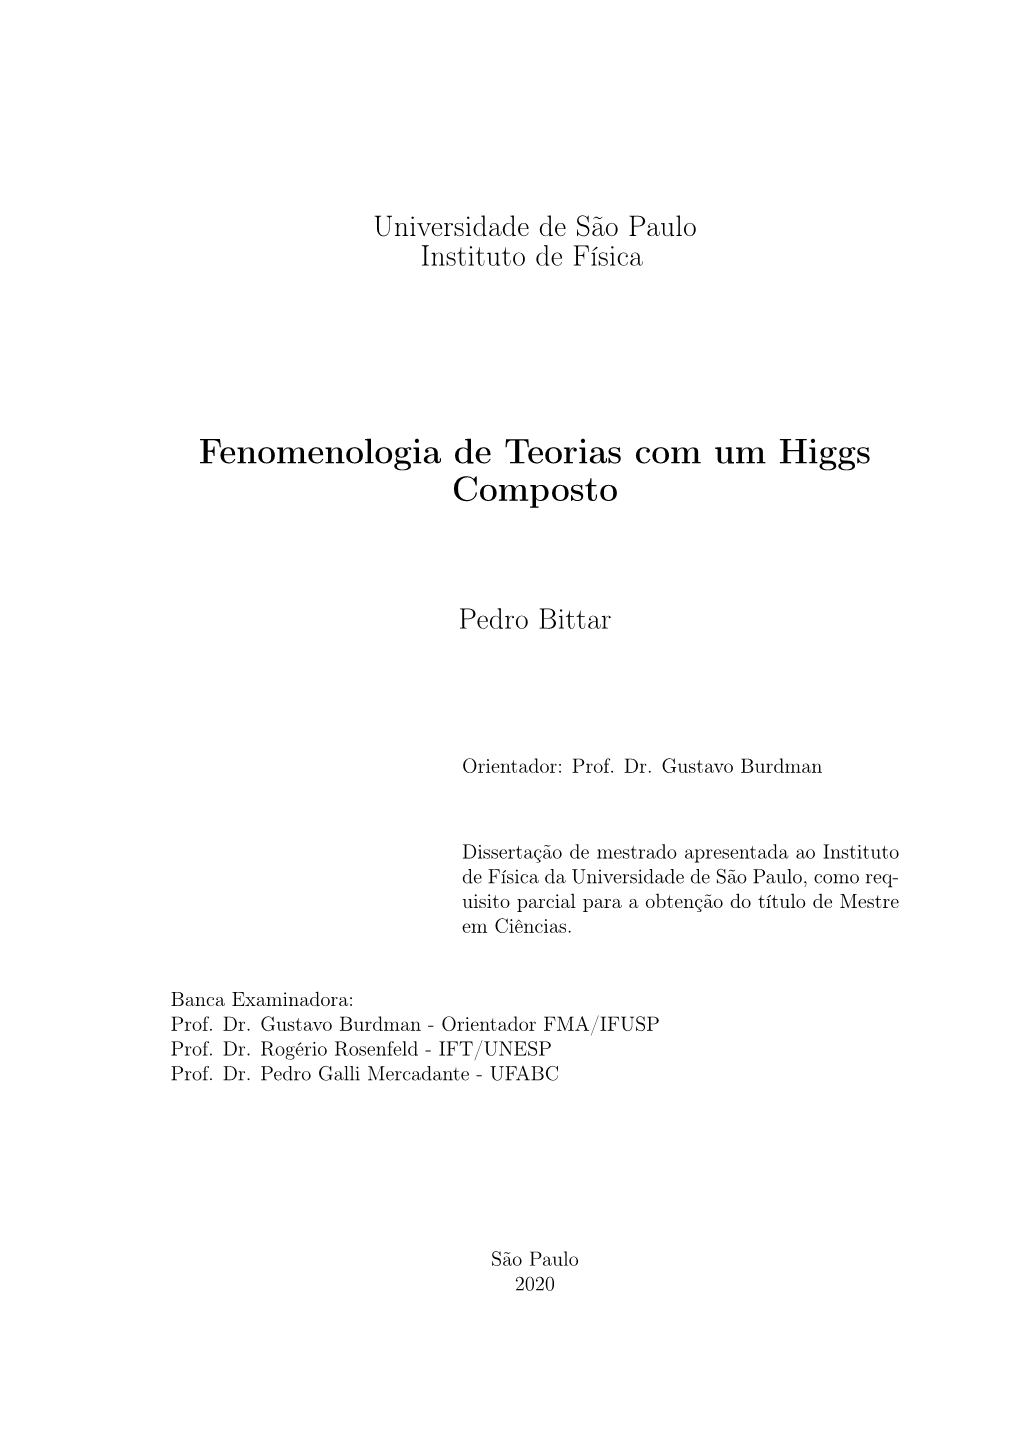 On the Phenomenology of Theories with a Composite Higgs